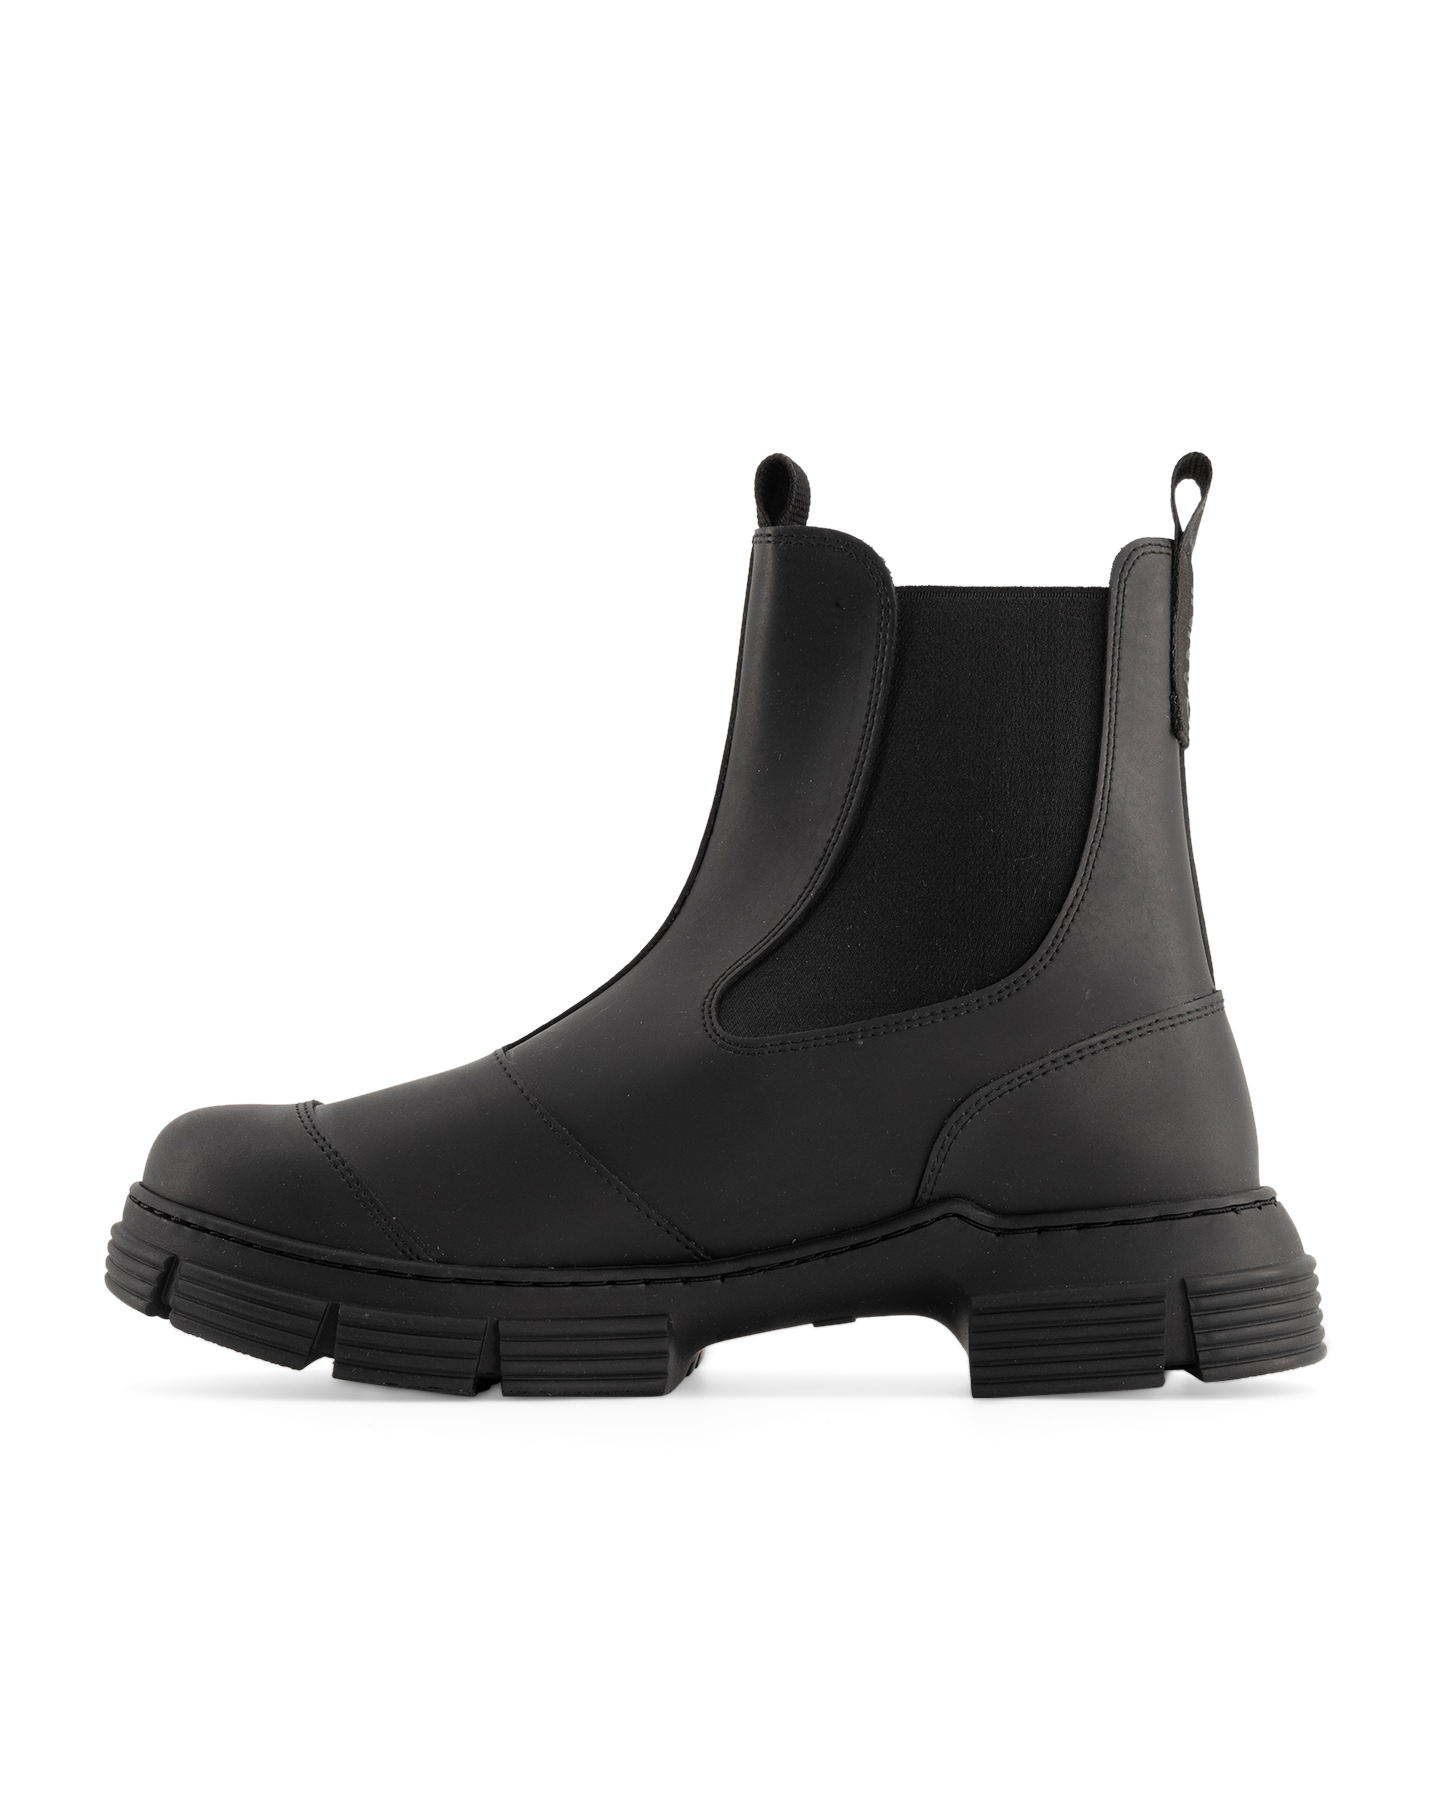 Ganni Recycled Rubber City Boot BLACK 4